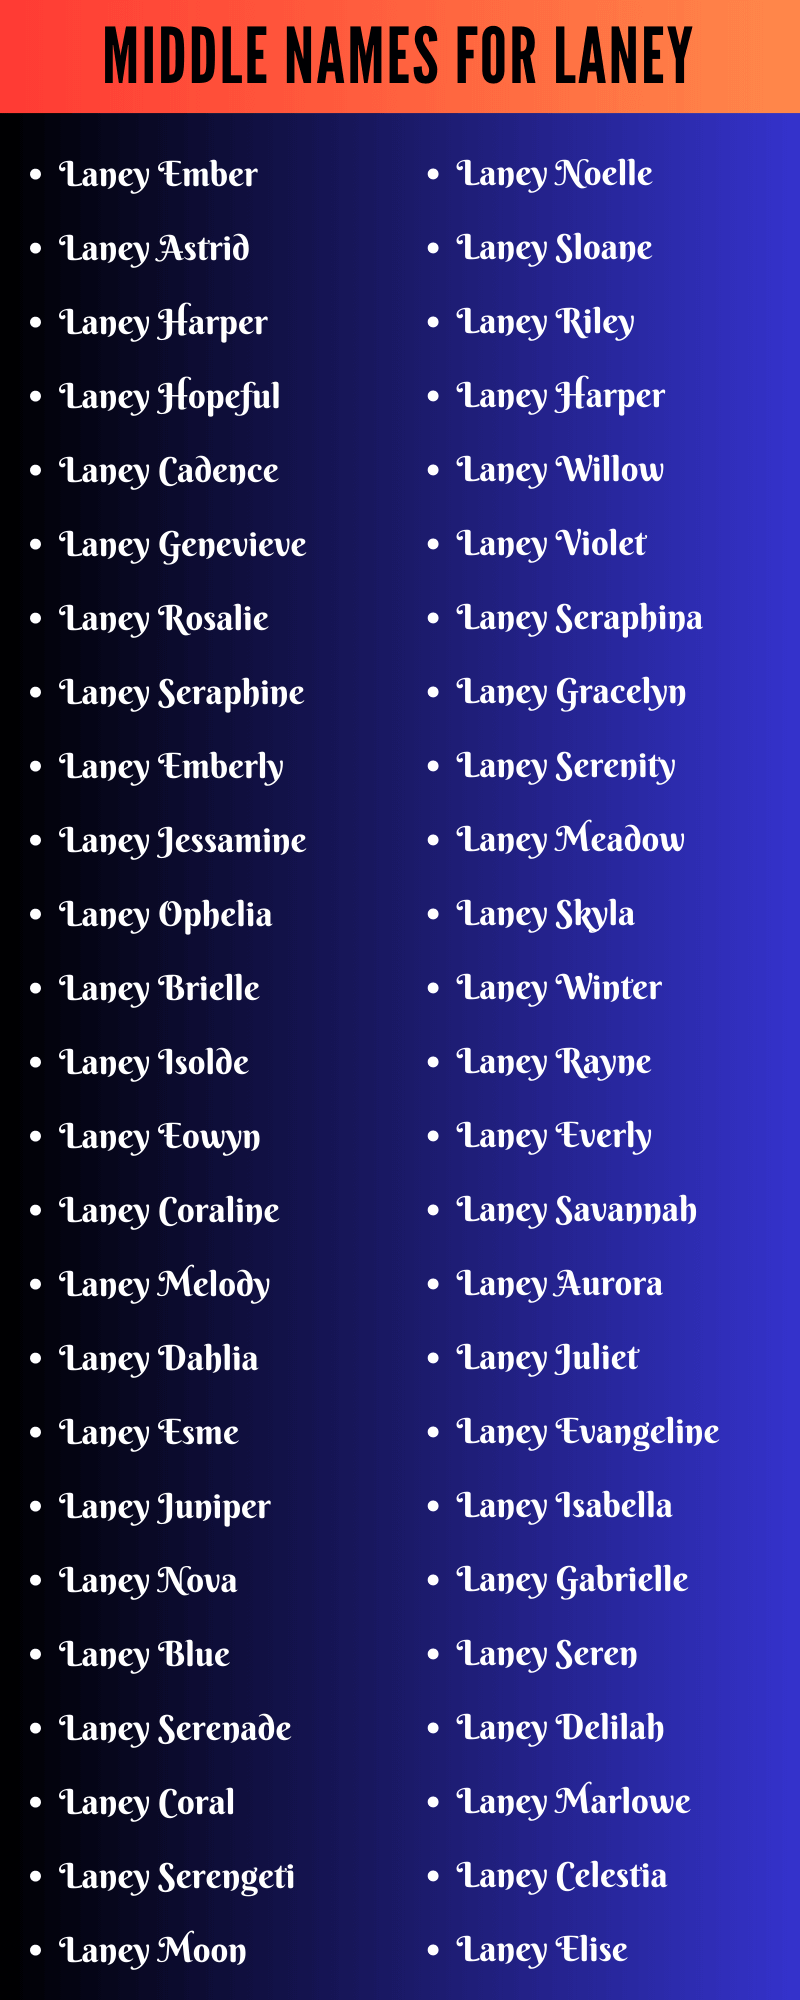 Middle Names For Laney